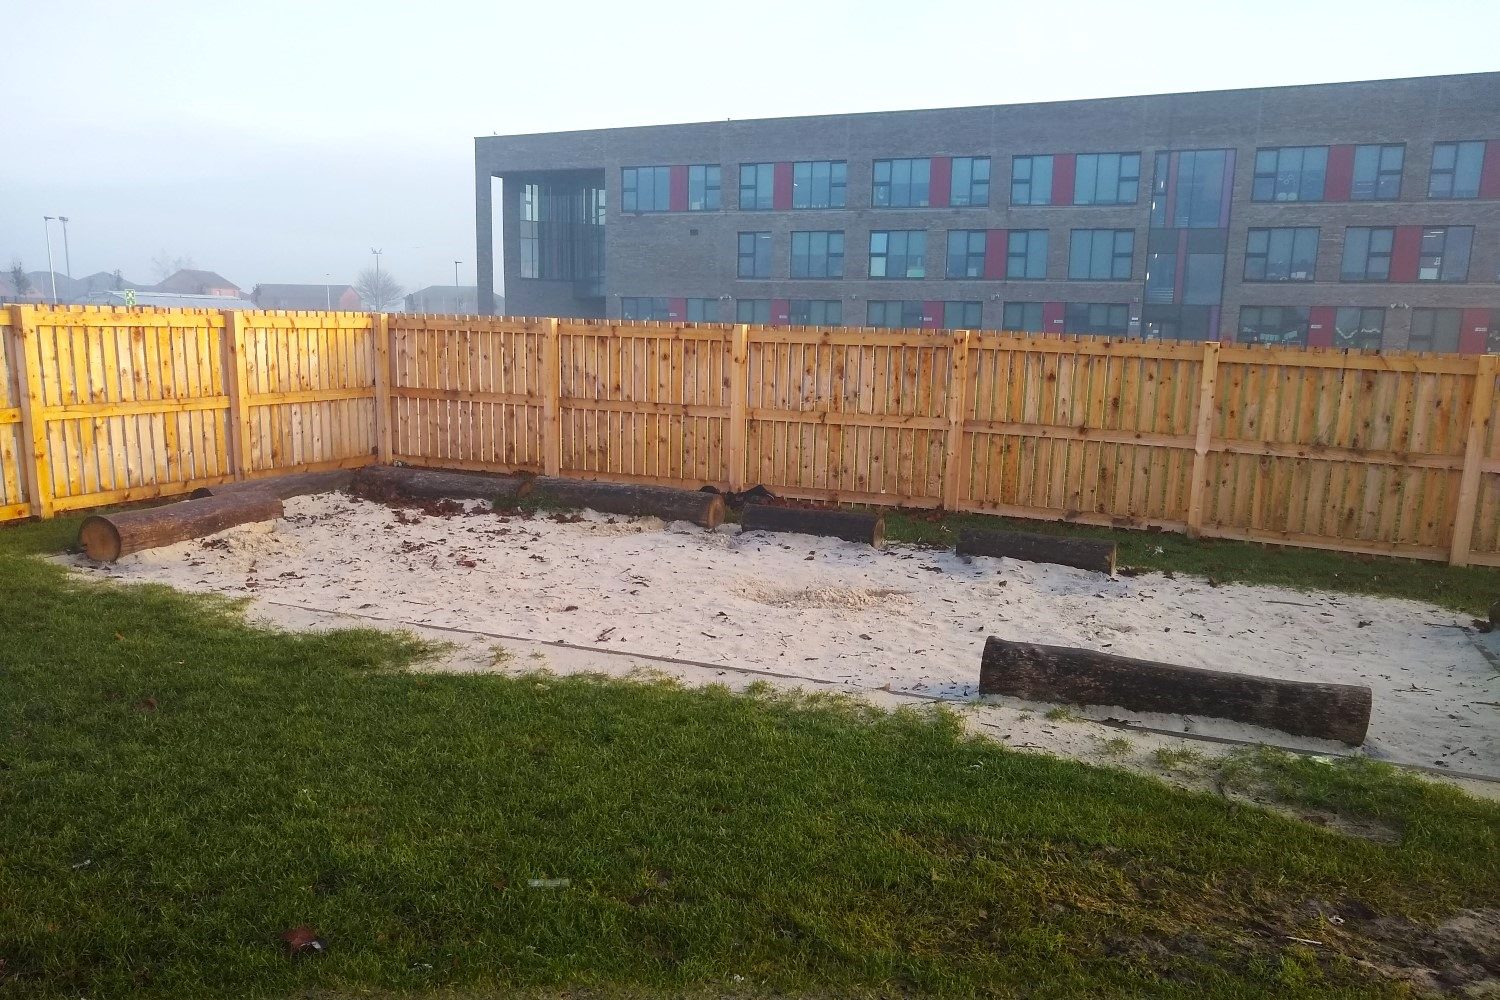 A fenced sandy area of some climate ready school grounds.